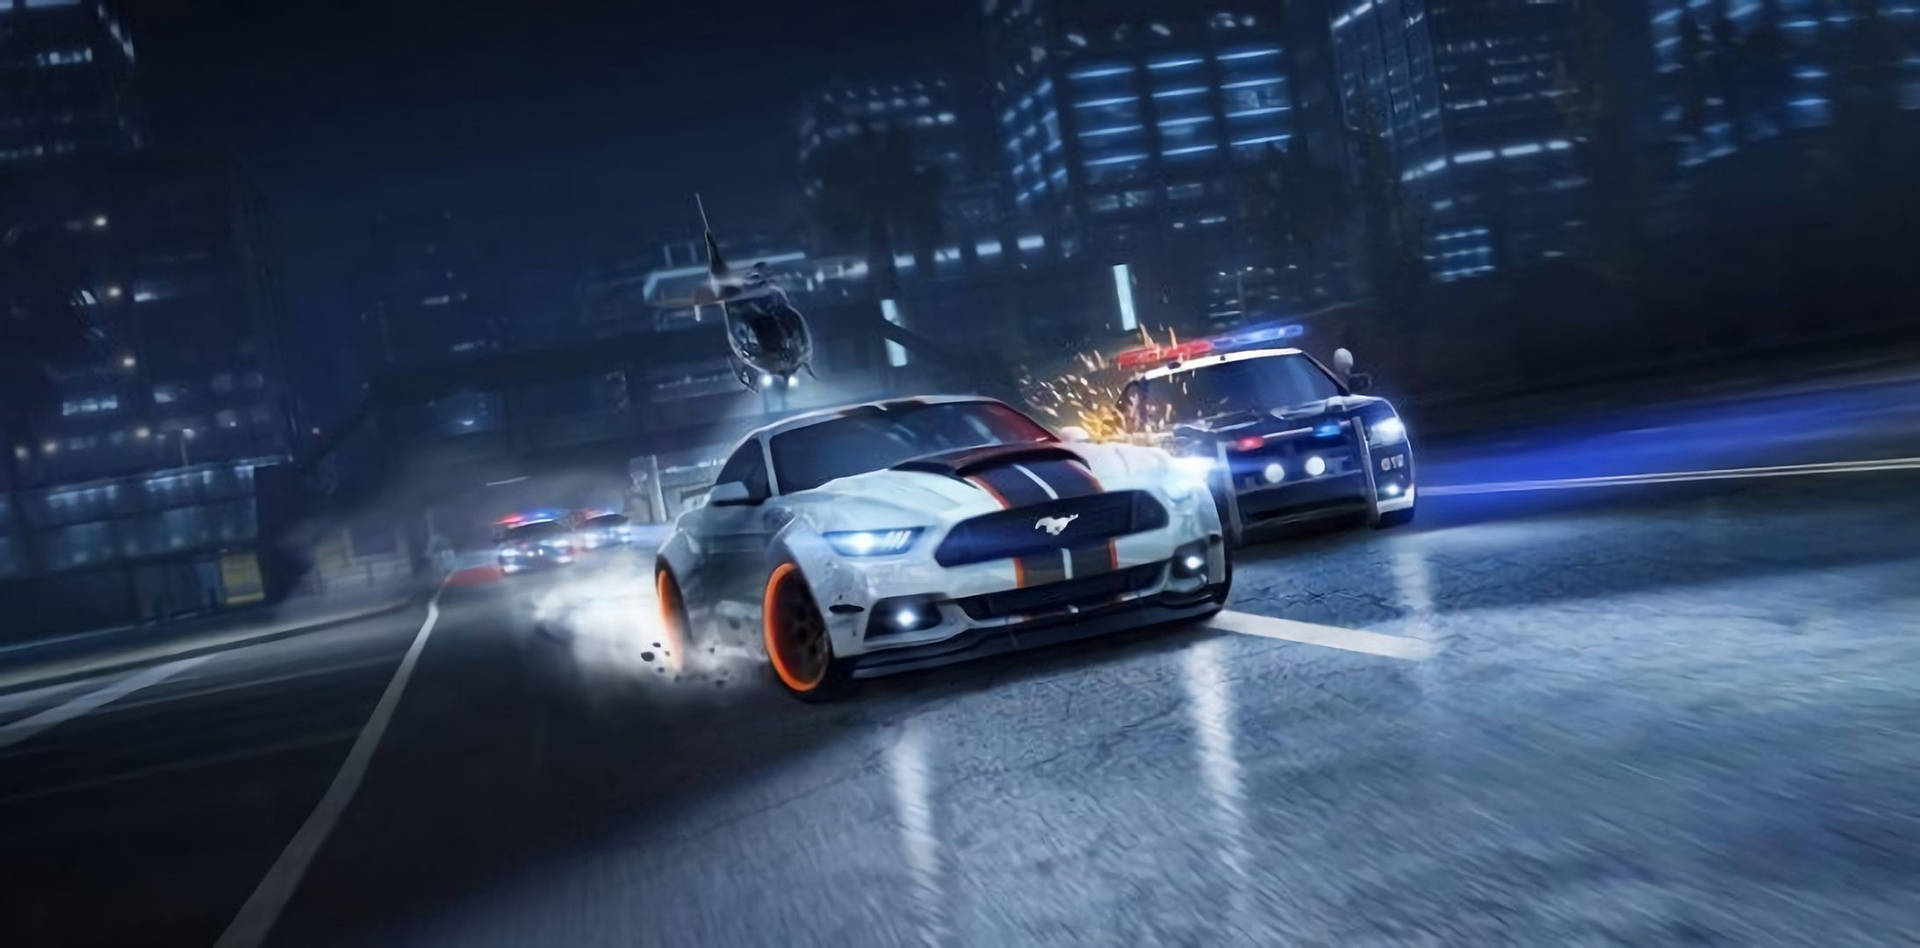 Need For Speed Heat In Action Wallpaper